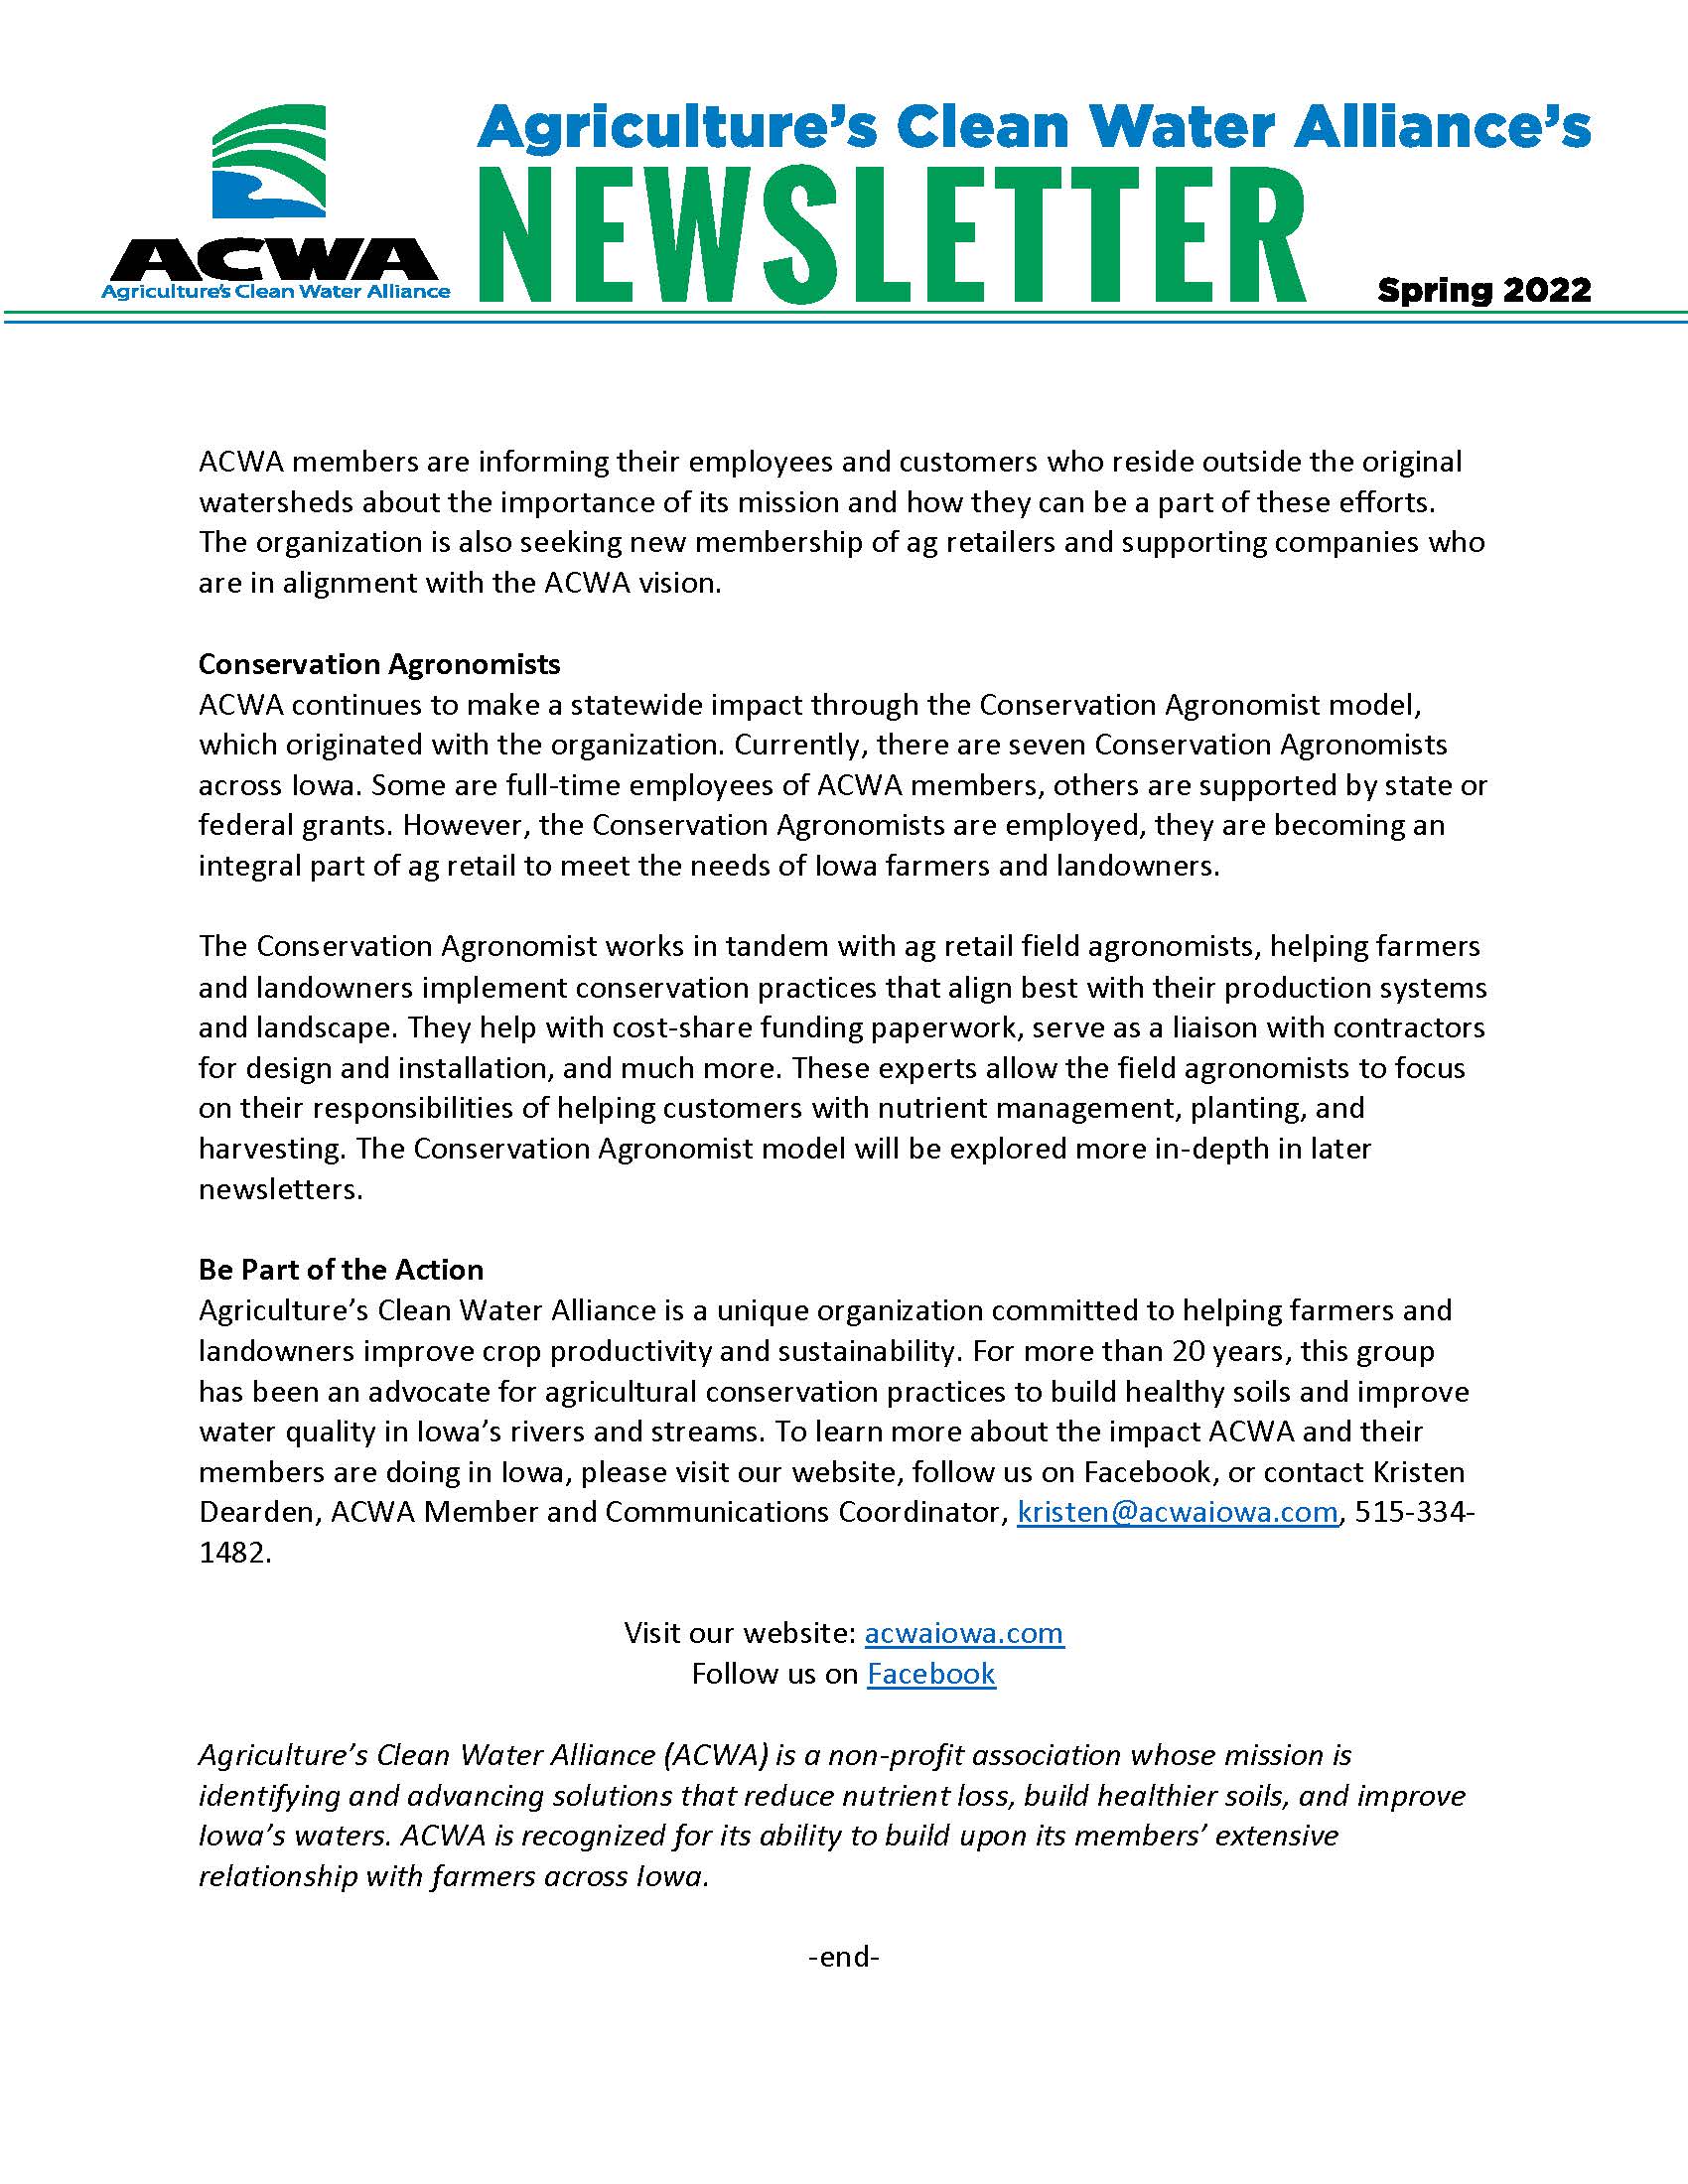 spring_2022_acwa_newsletter_Page_3.jpg